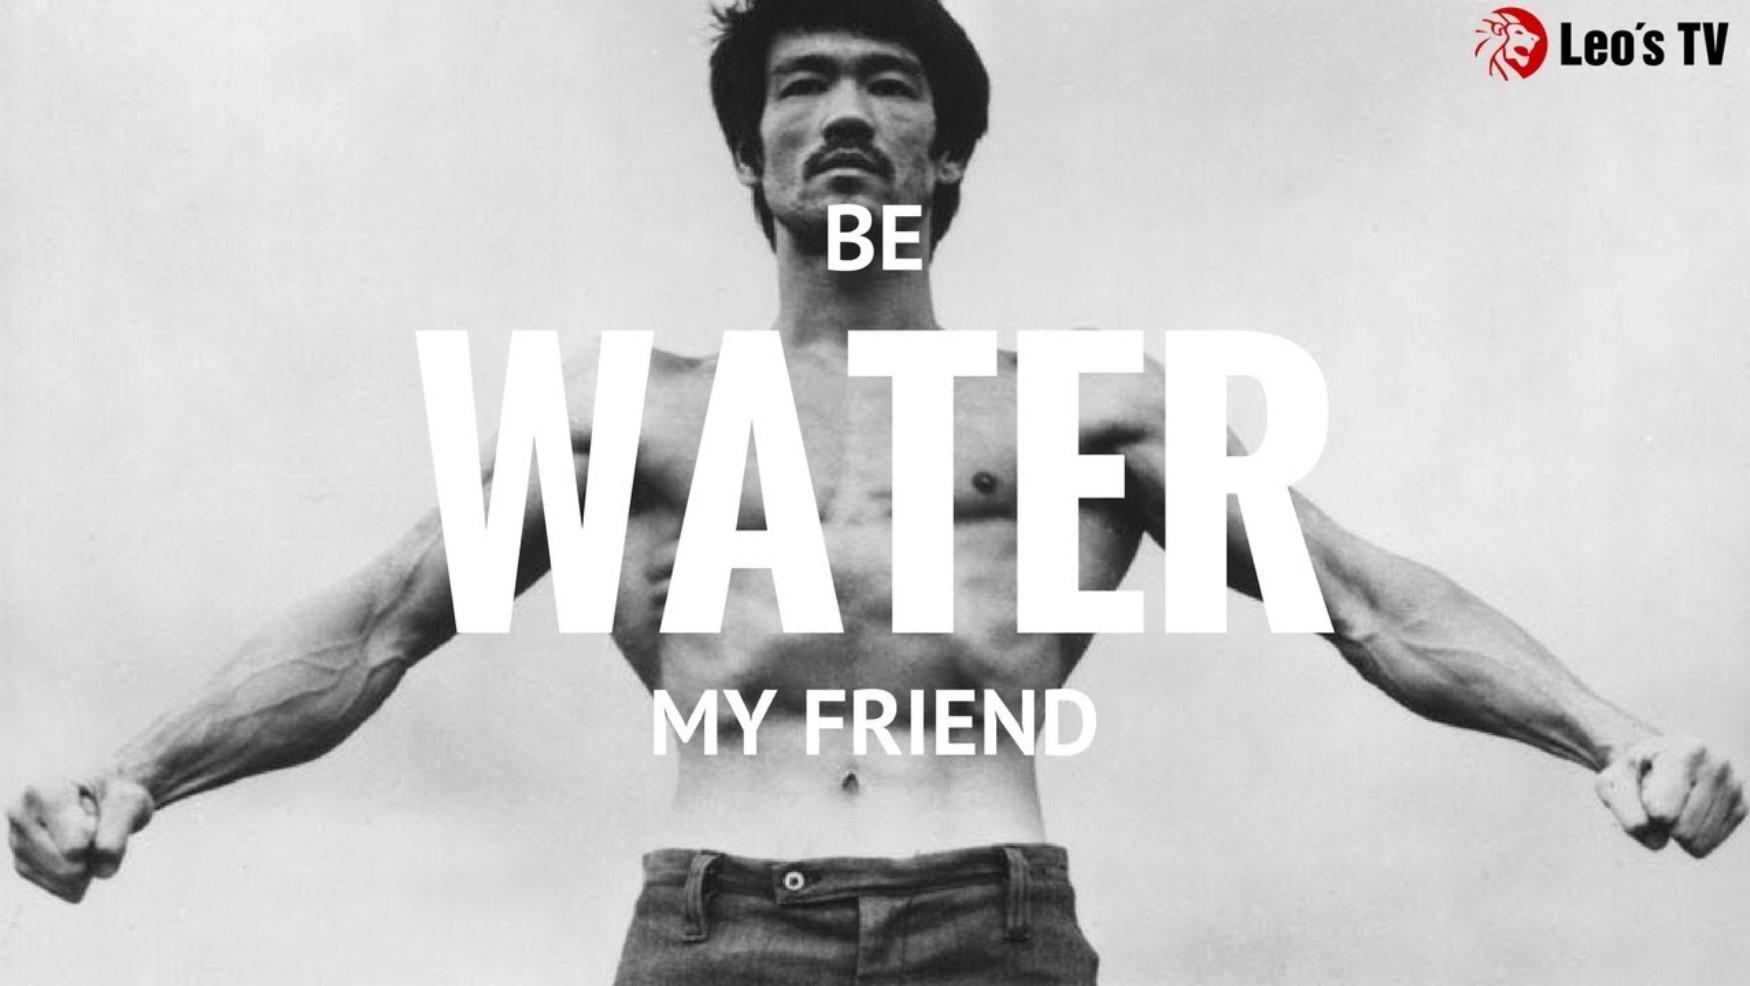 Брюс вода. Брюс ли be Water. Брюс ли be like Water. Be Water my friend Bruce Lee. Be Water my friend.